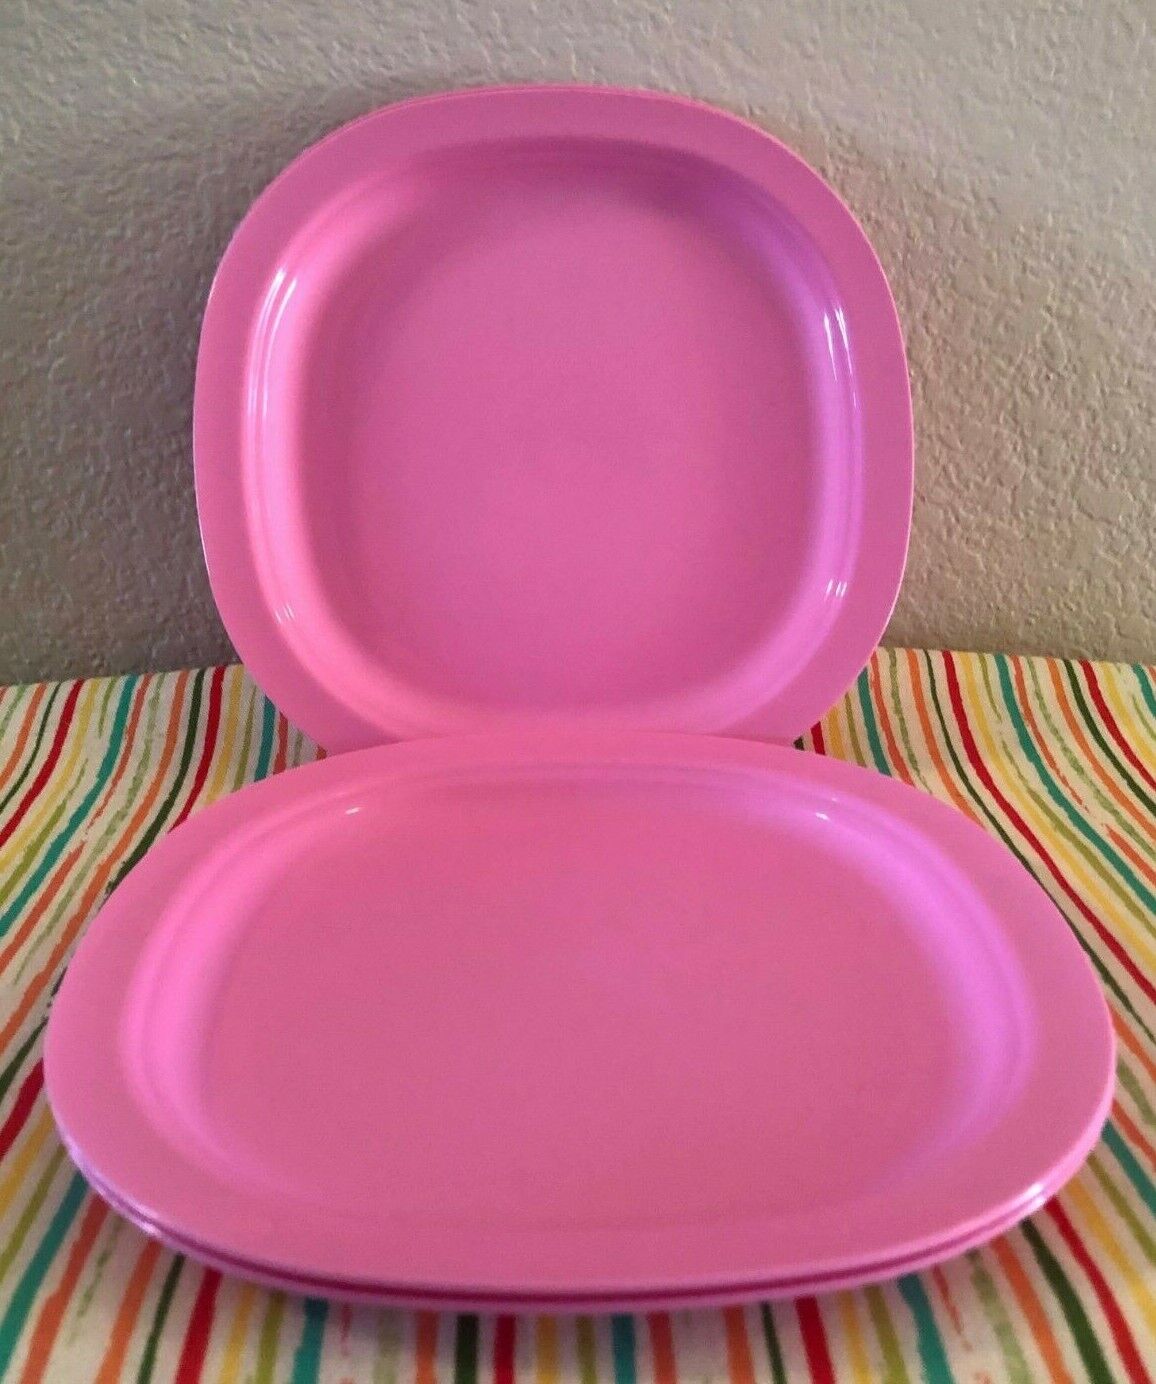 Tupperware Microwave Reheatable Luncheon Plates 9 1/2” Pink Set of 4 New